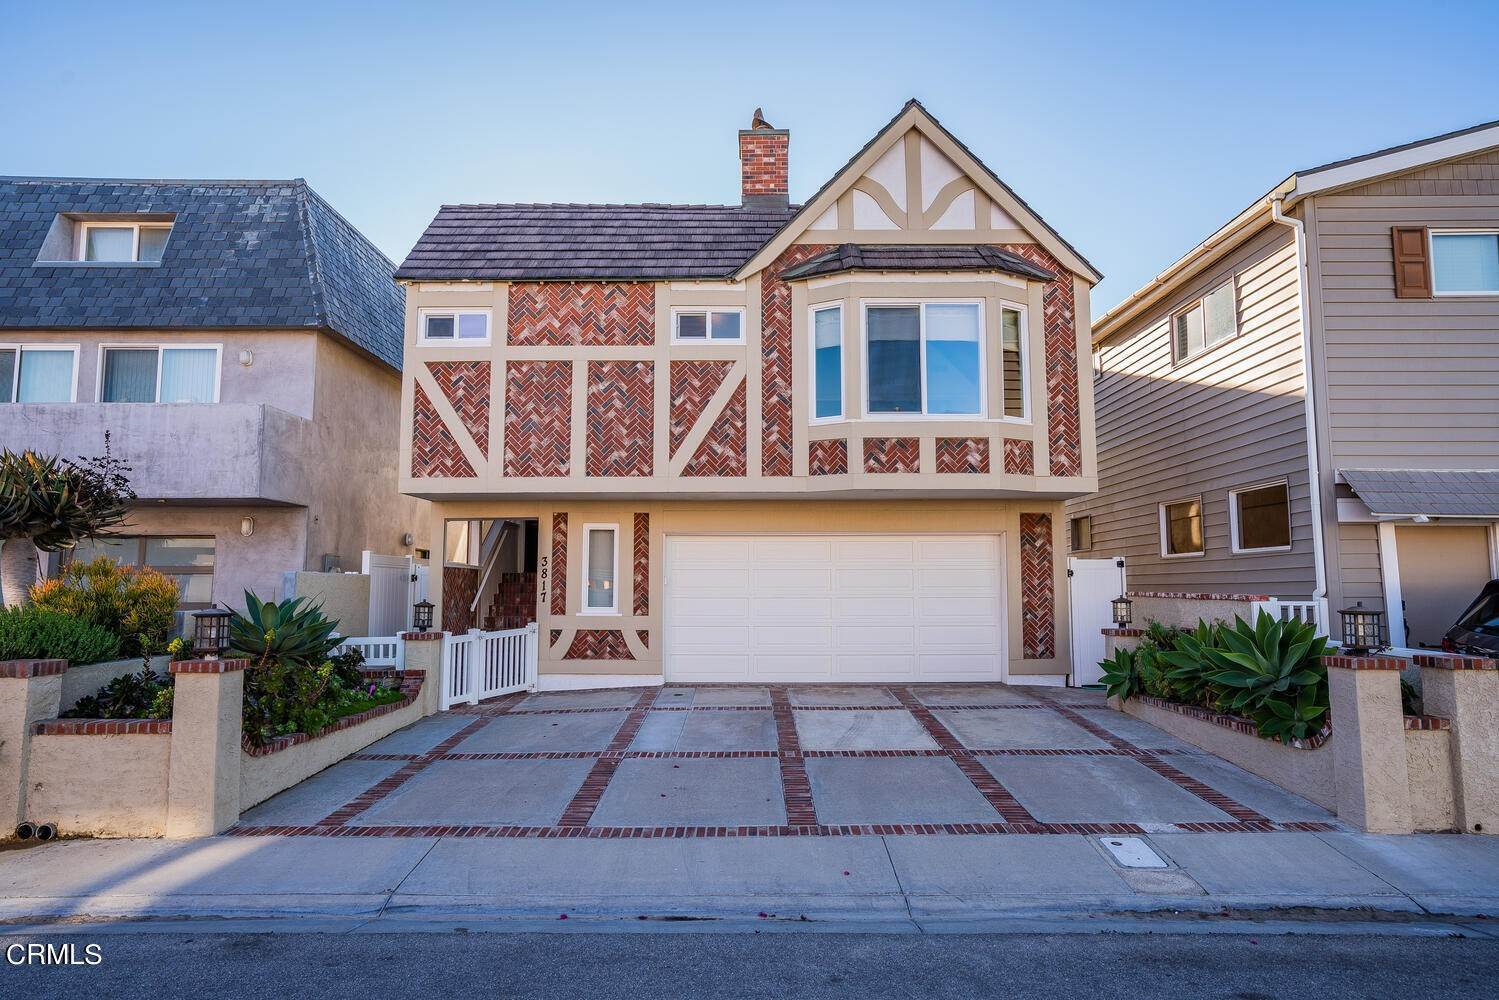 48. Single Family Homes for Sale at 3817 Ocean Drive Oxnard, California 93035 United States